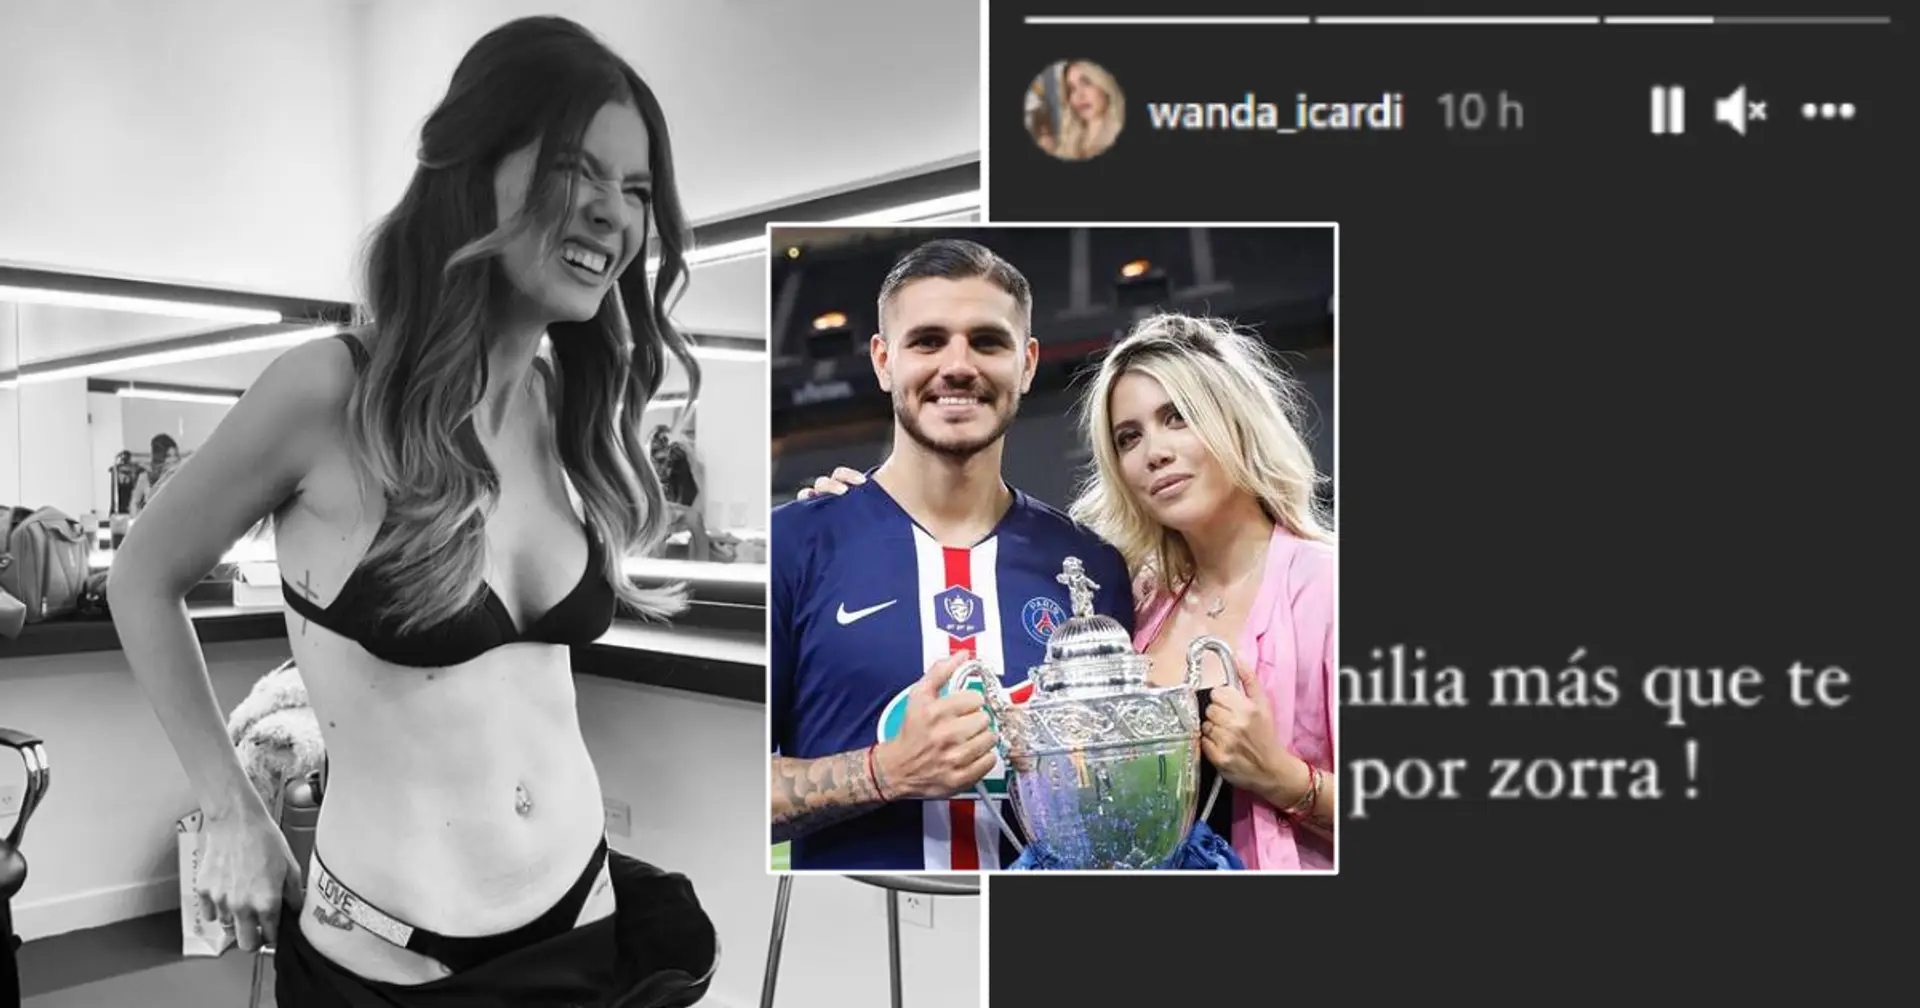 RUMOUR: Woman Mauro Icardi reportedly cheated on Wanda Nara with found out